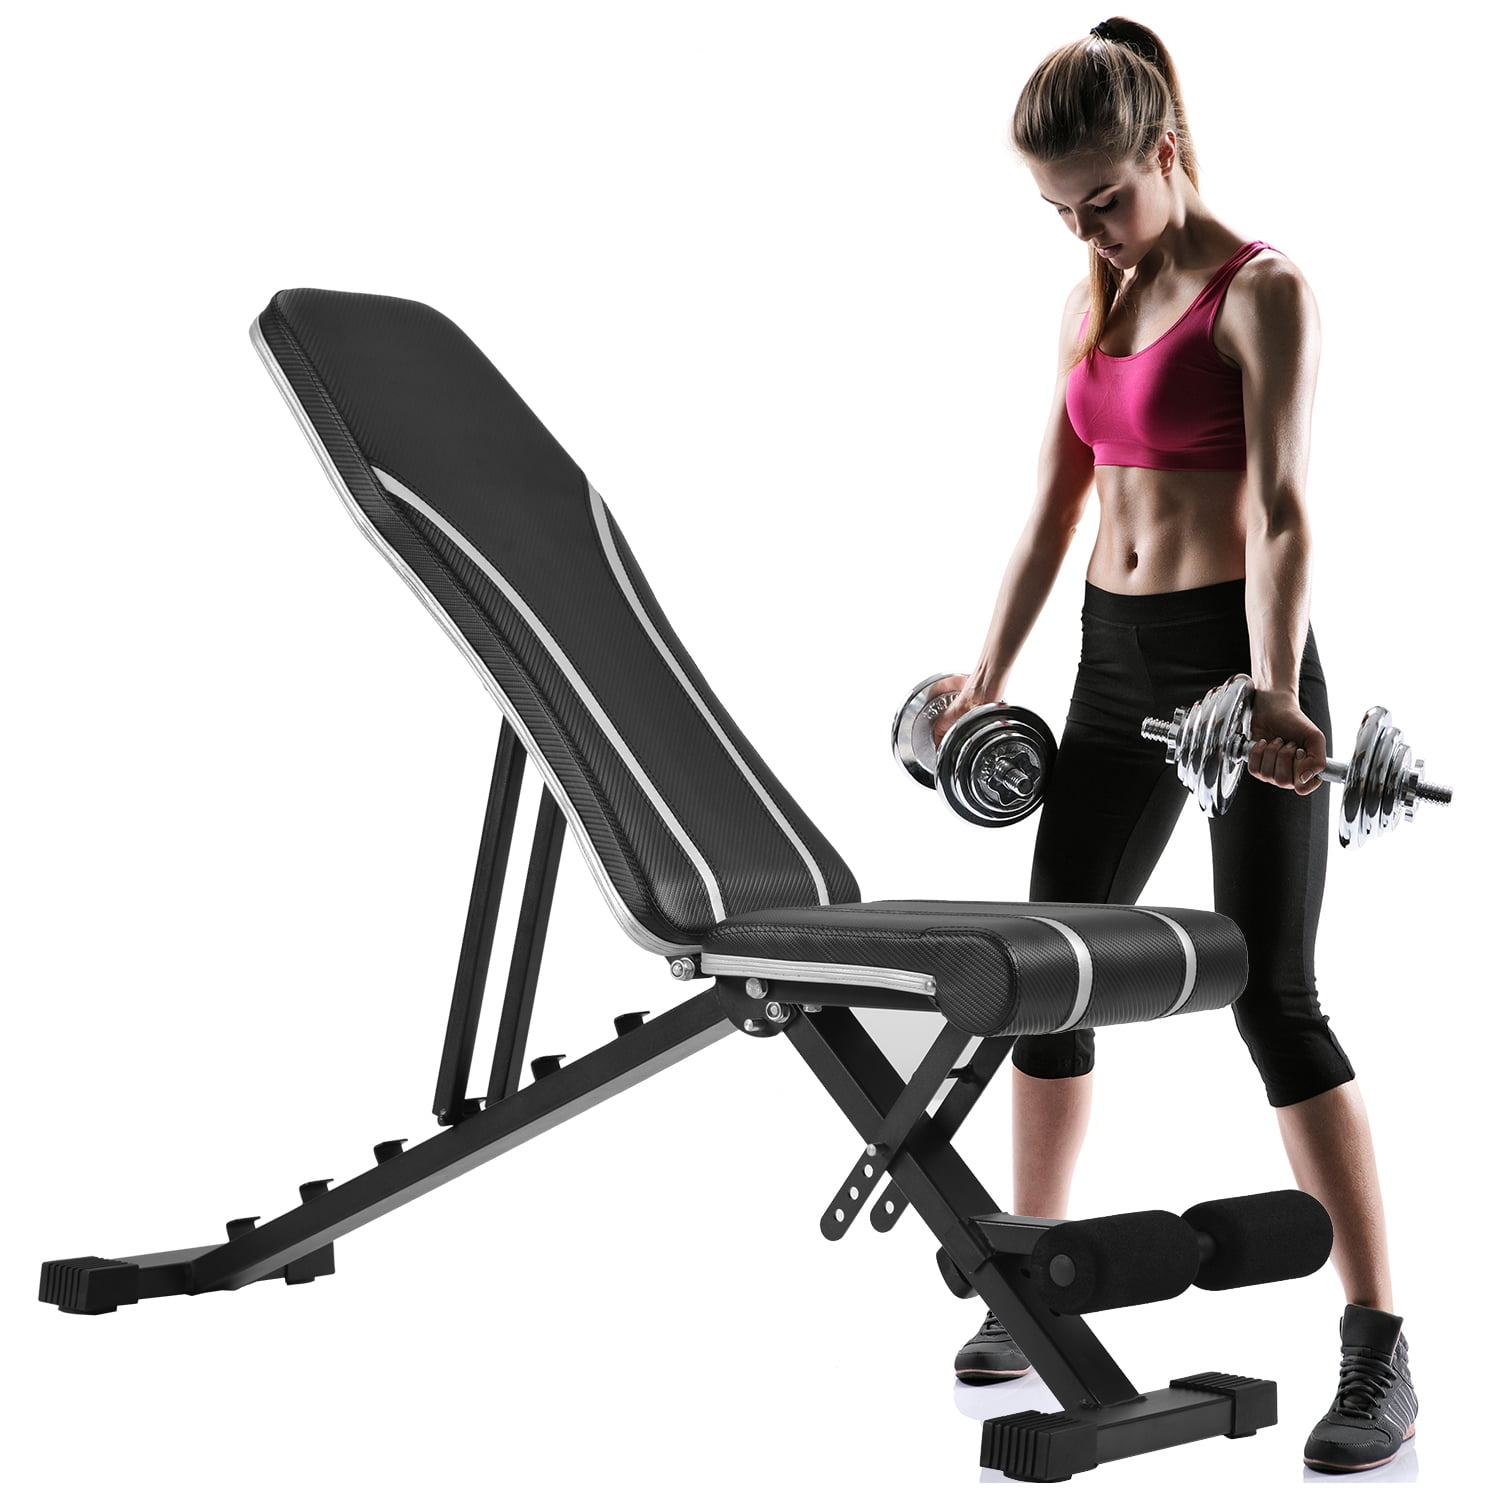 Details about   Adjustable Dumbbell Weight Bench Fitness Incline Decline Foldable Workout Gym 